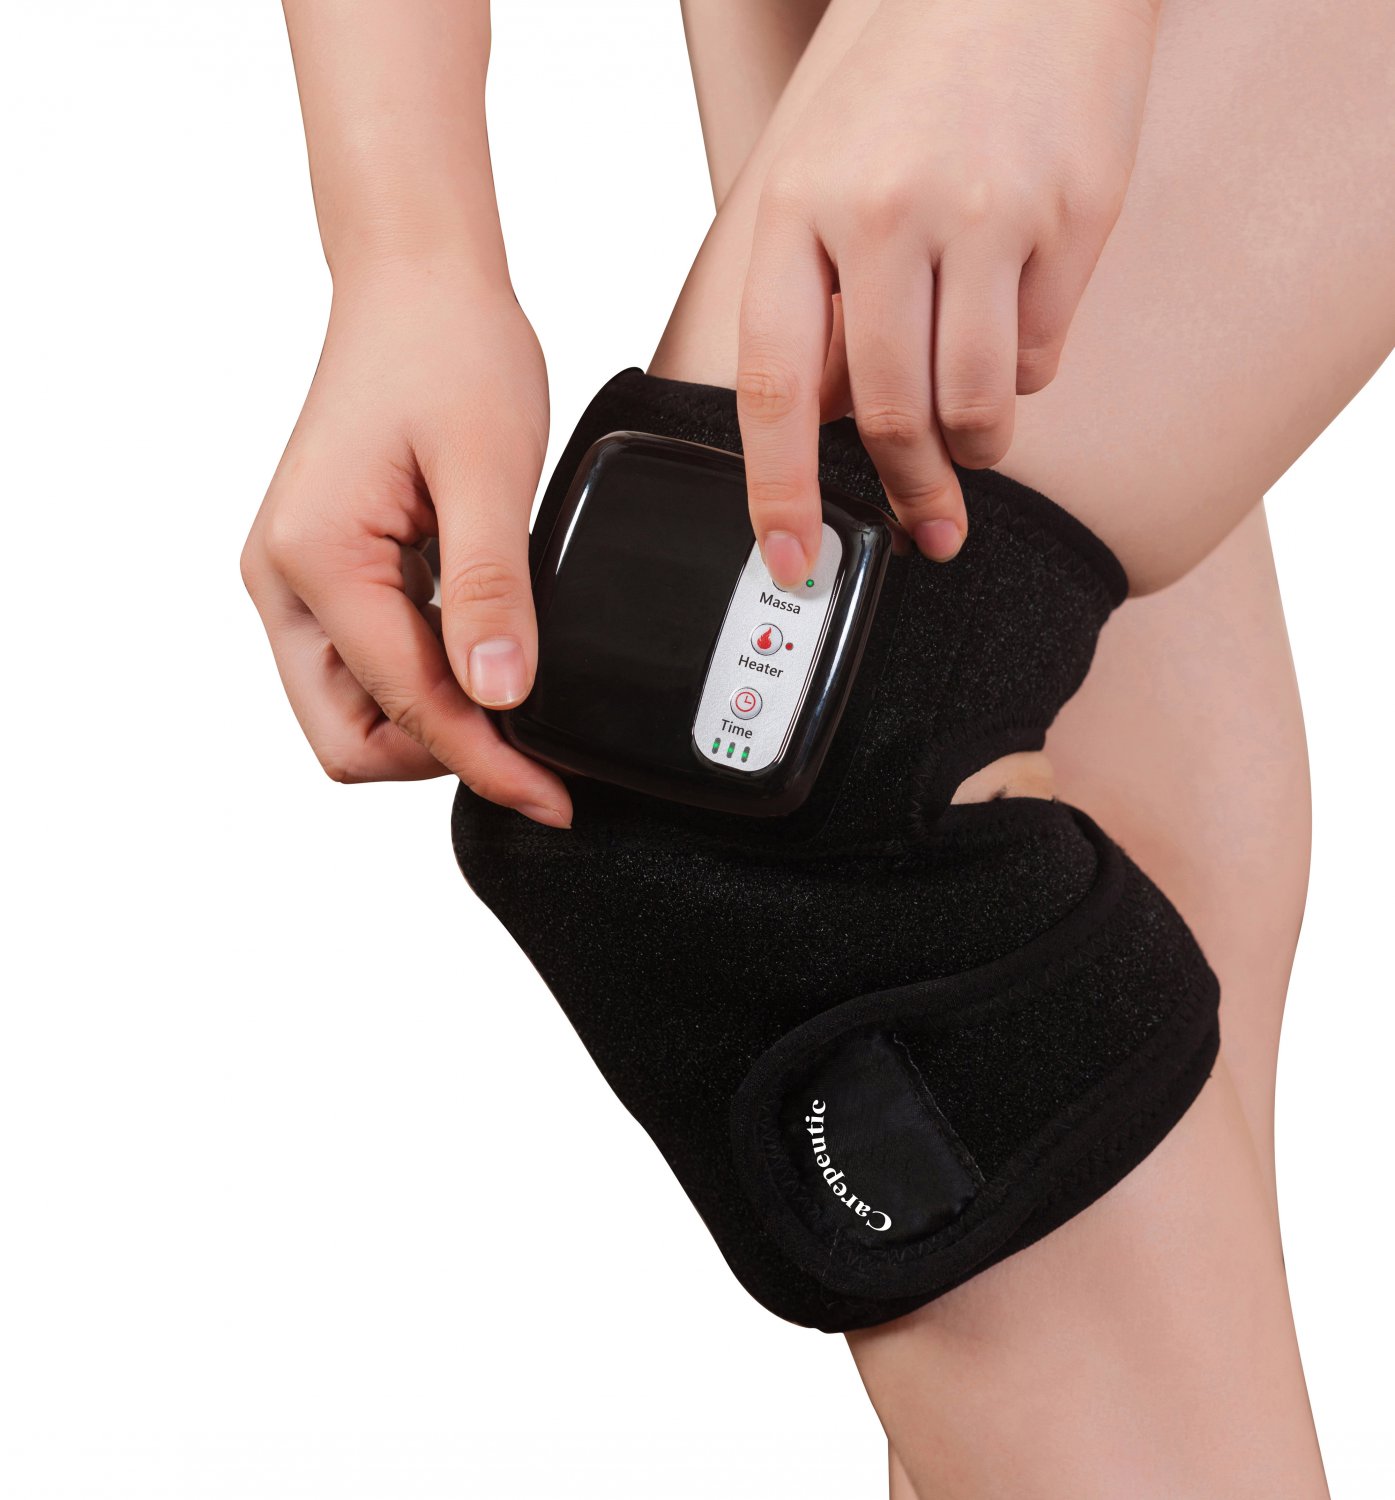 Carepeutic Rechargeable Heated Vibration Knee and Joint Pain Relief Detox Massager